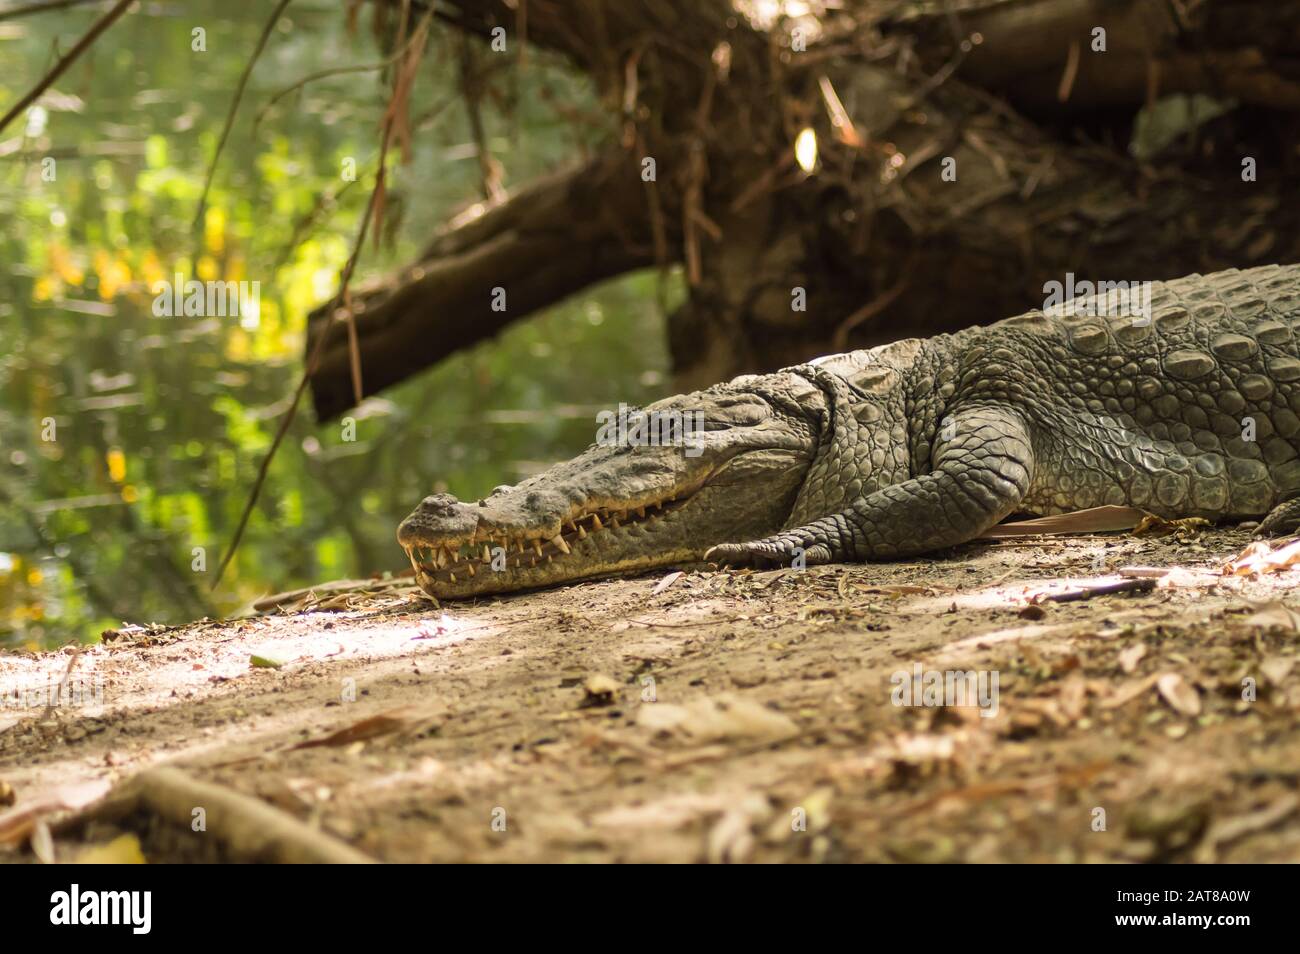 A crocodile basks in the heat of Gambia, West Africa. Natural, green. Stock Photo